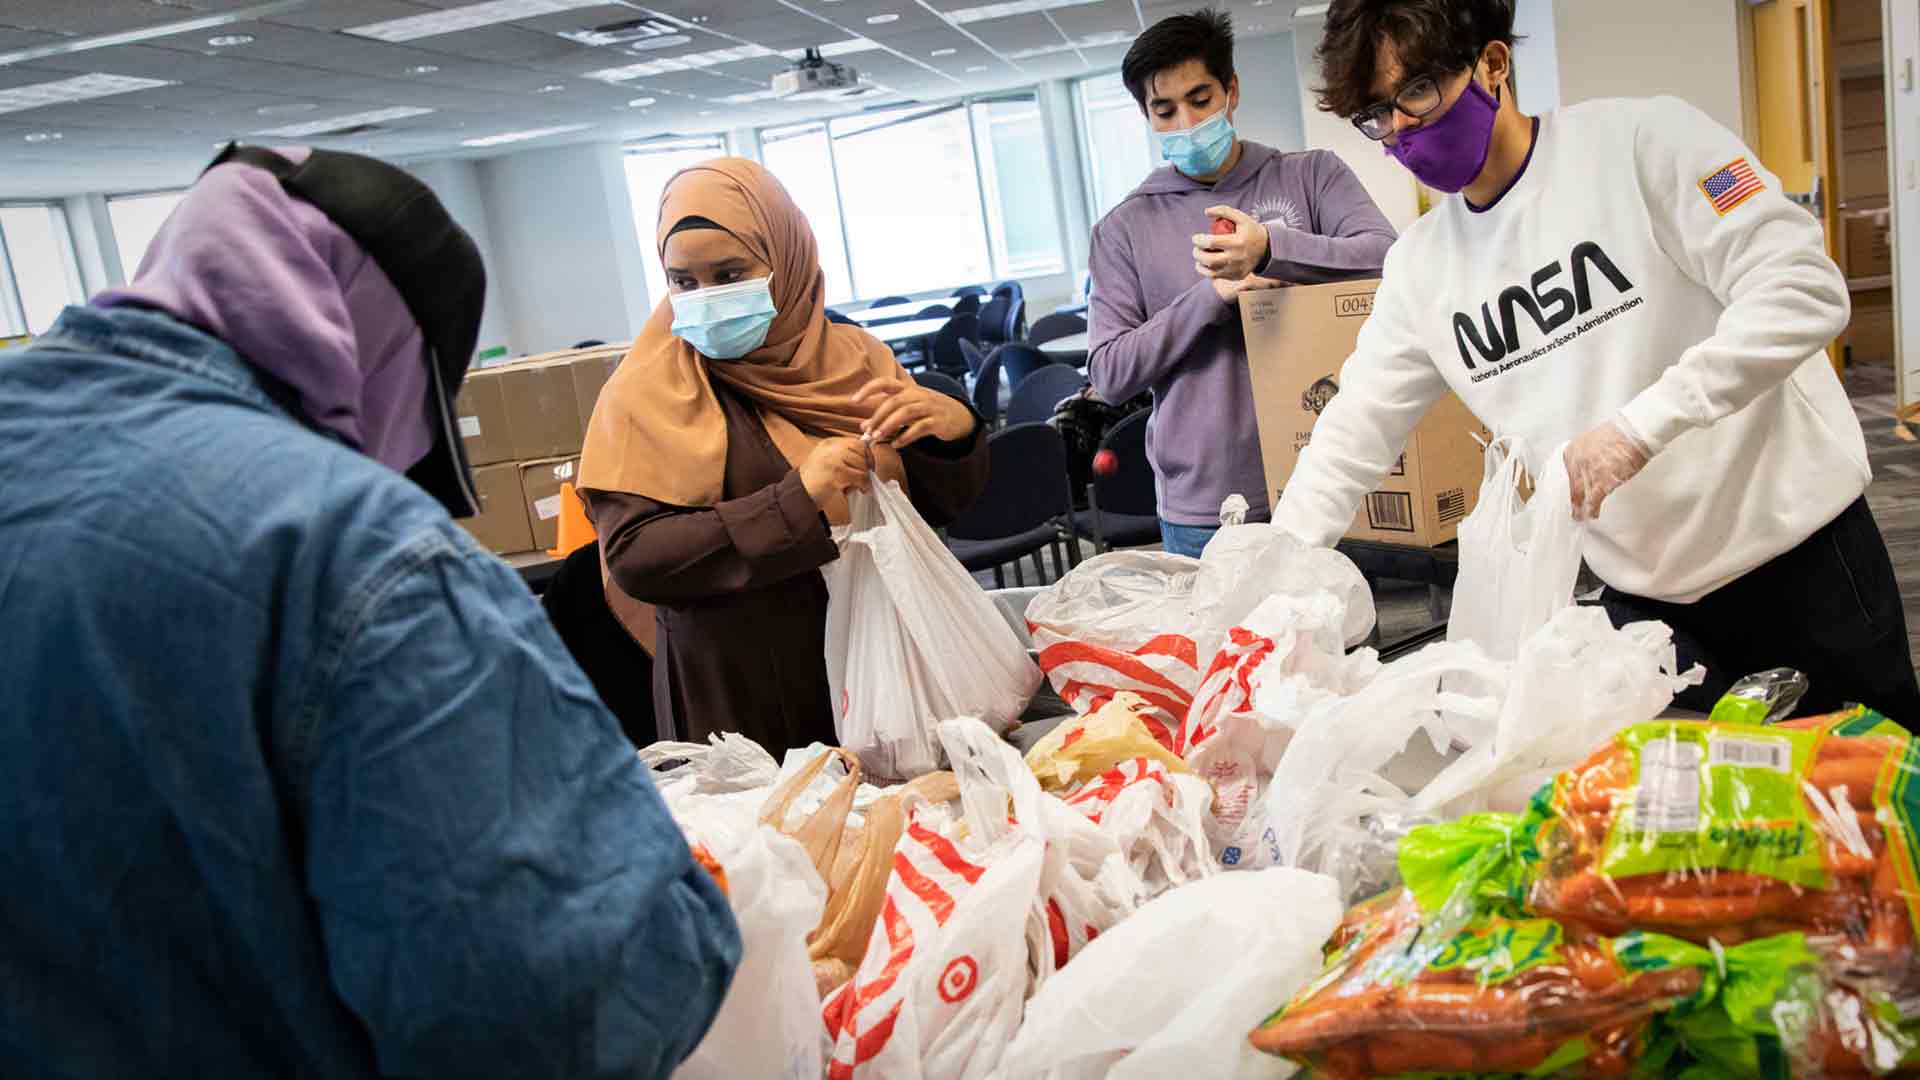 Students fill bags with food